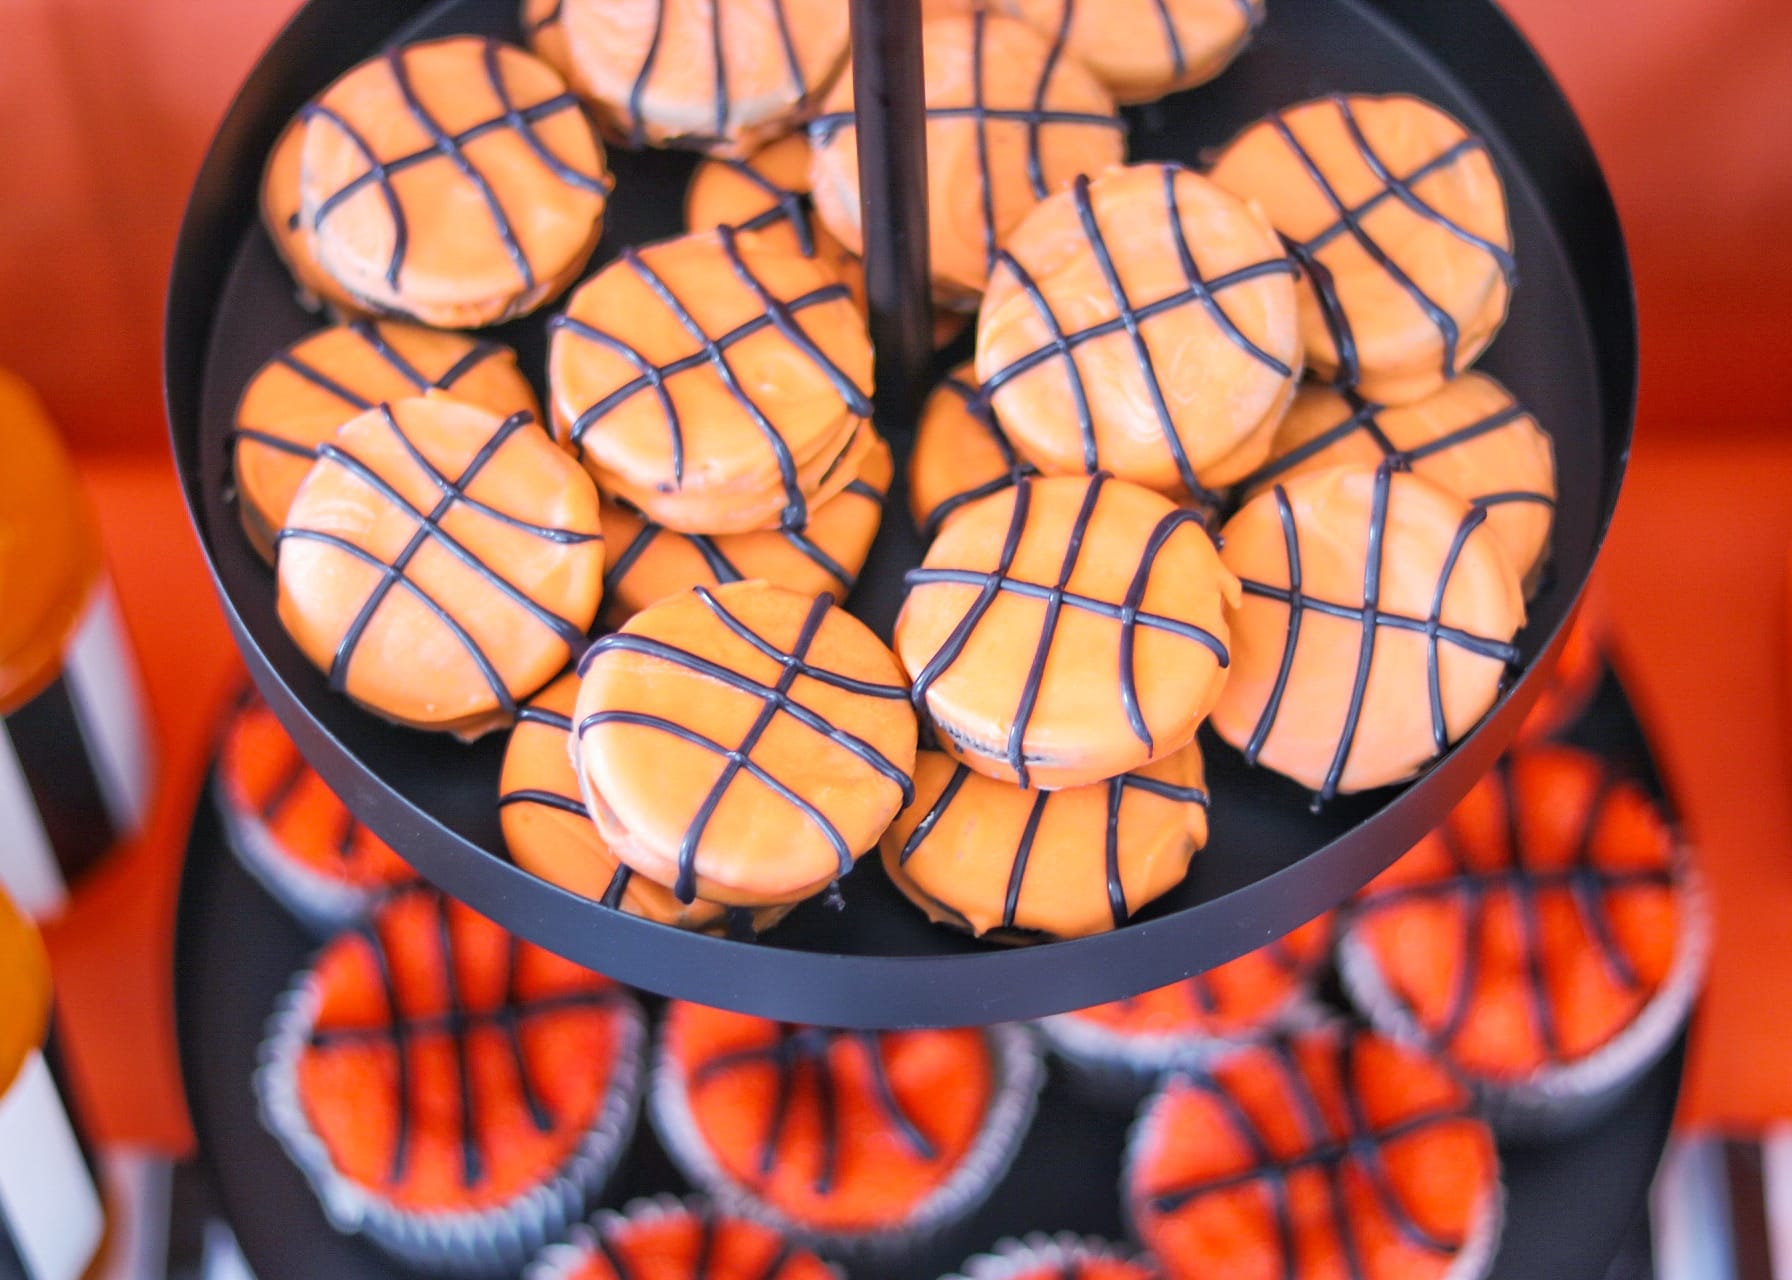 basketball themed desserts: dipped oreos